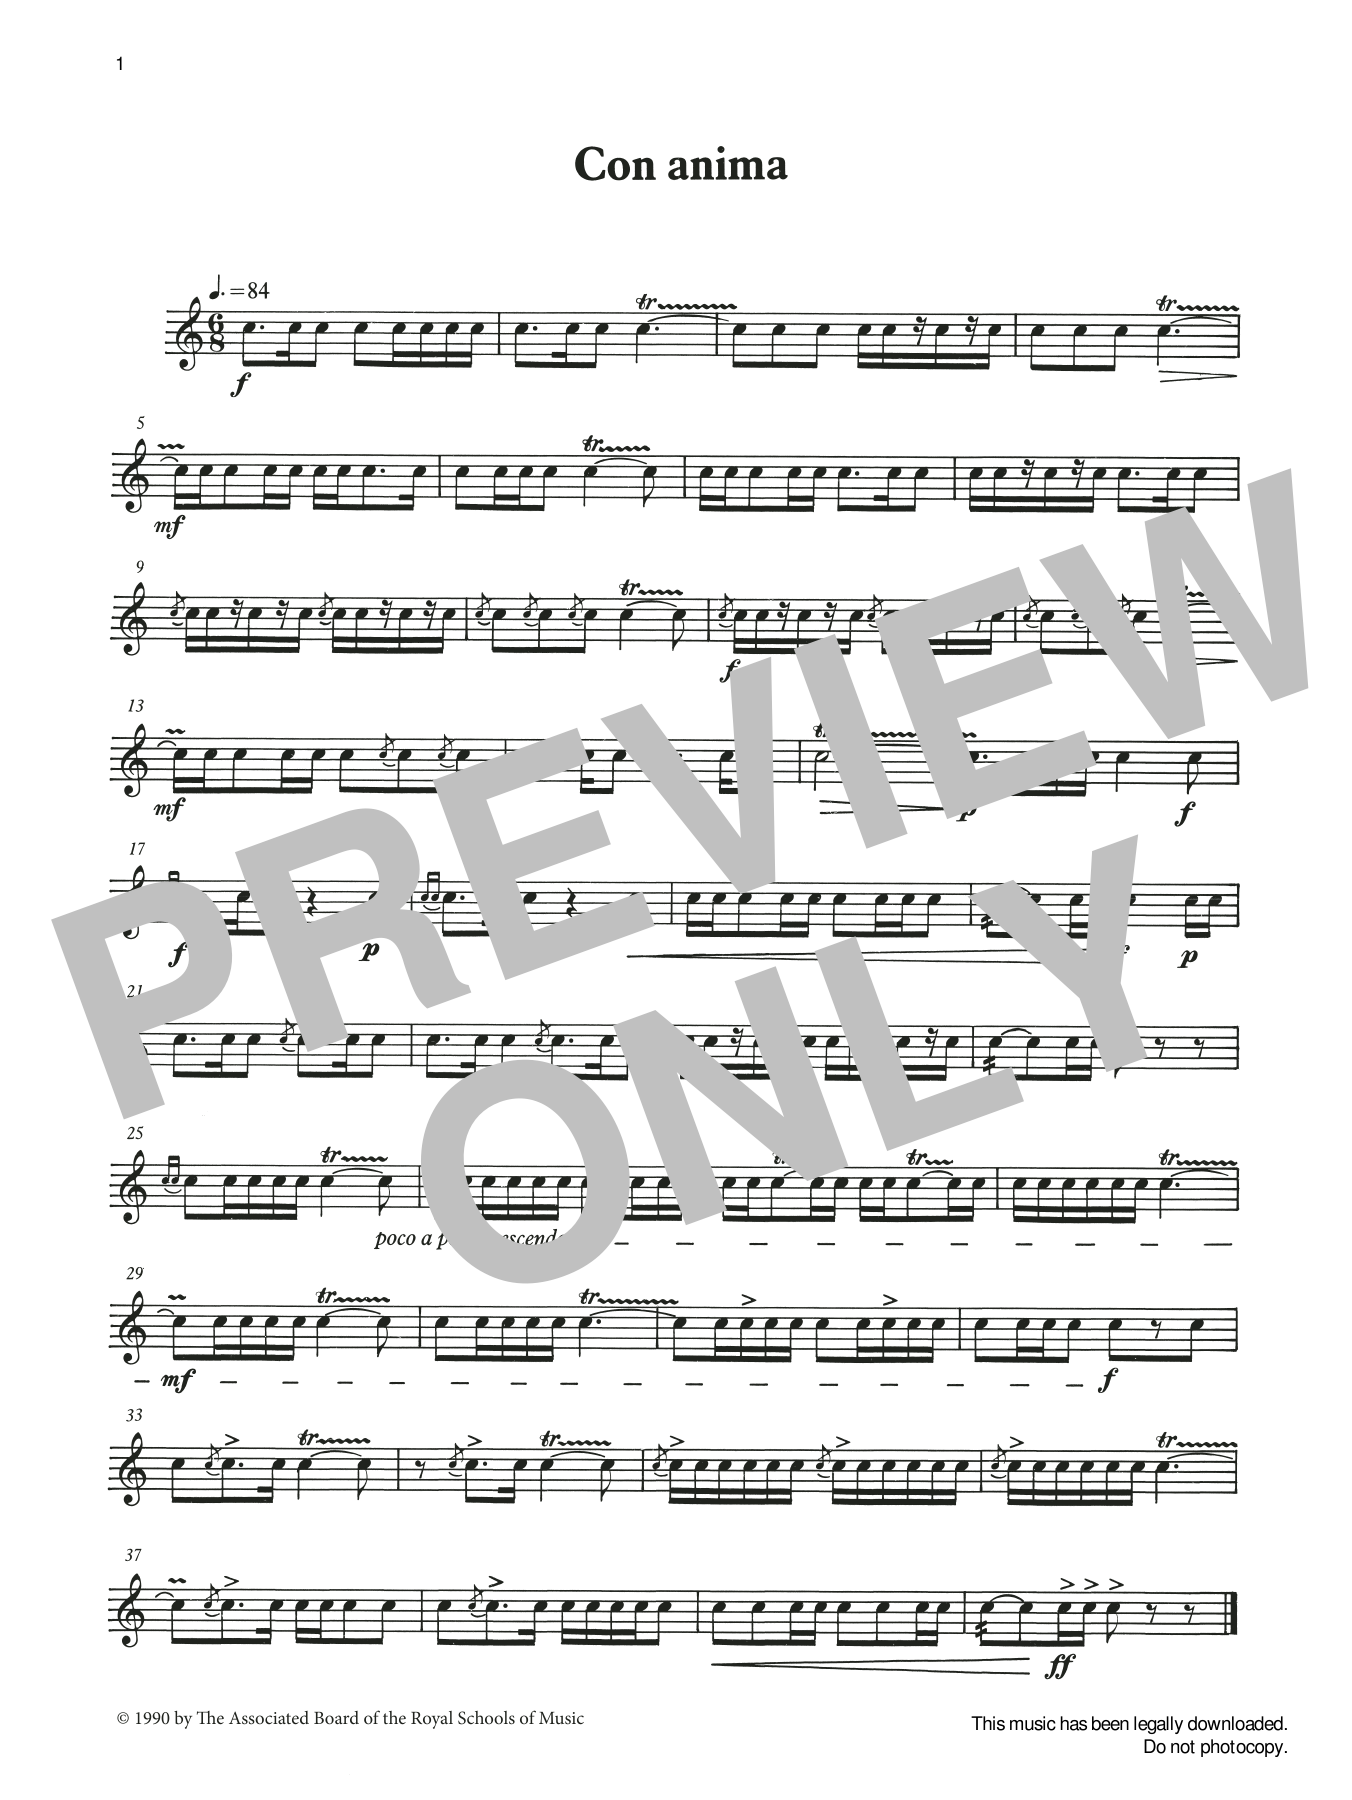 Download Ian Wright and Kevin Hathaway Con anima from Graded Music for Snare D Sheet Music